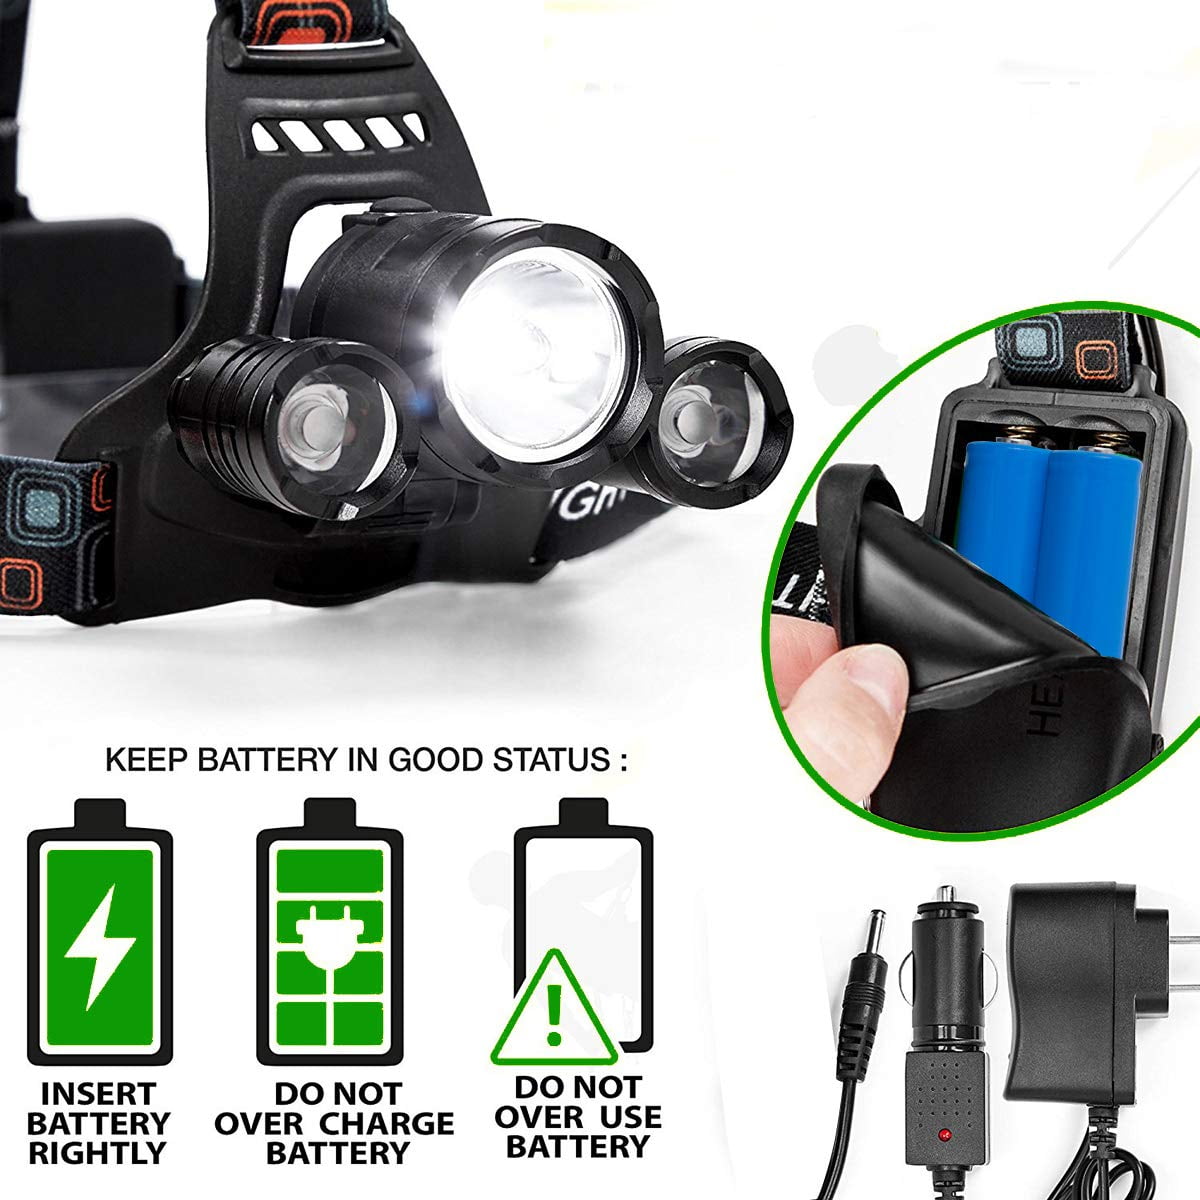 90° Rotating Headlight Head Torch Rechargeable Onimoy 6000 Lumens Head Torch LED Super Bright with 3 Lights 4 Modes IPX5 Waterproof Headlamp for Running/Walking/Cycling/Fishing/Camping